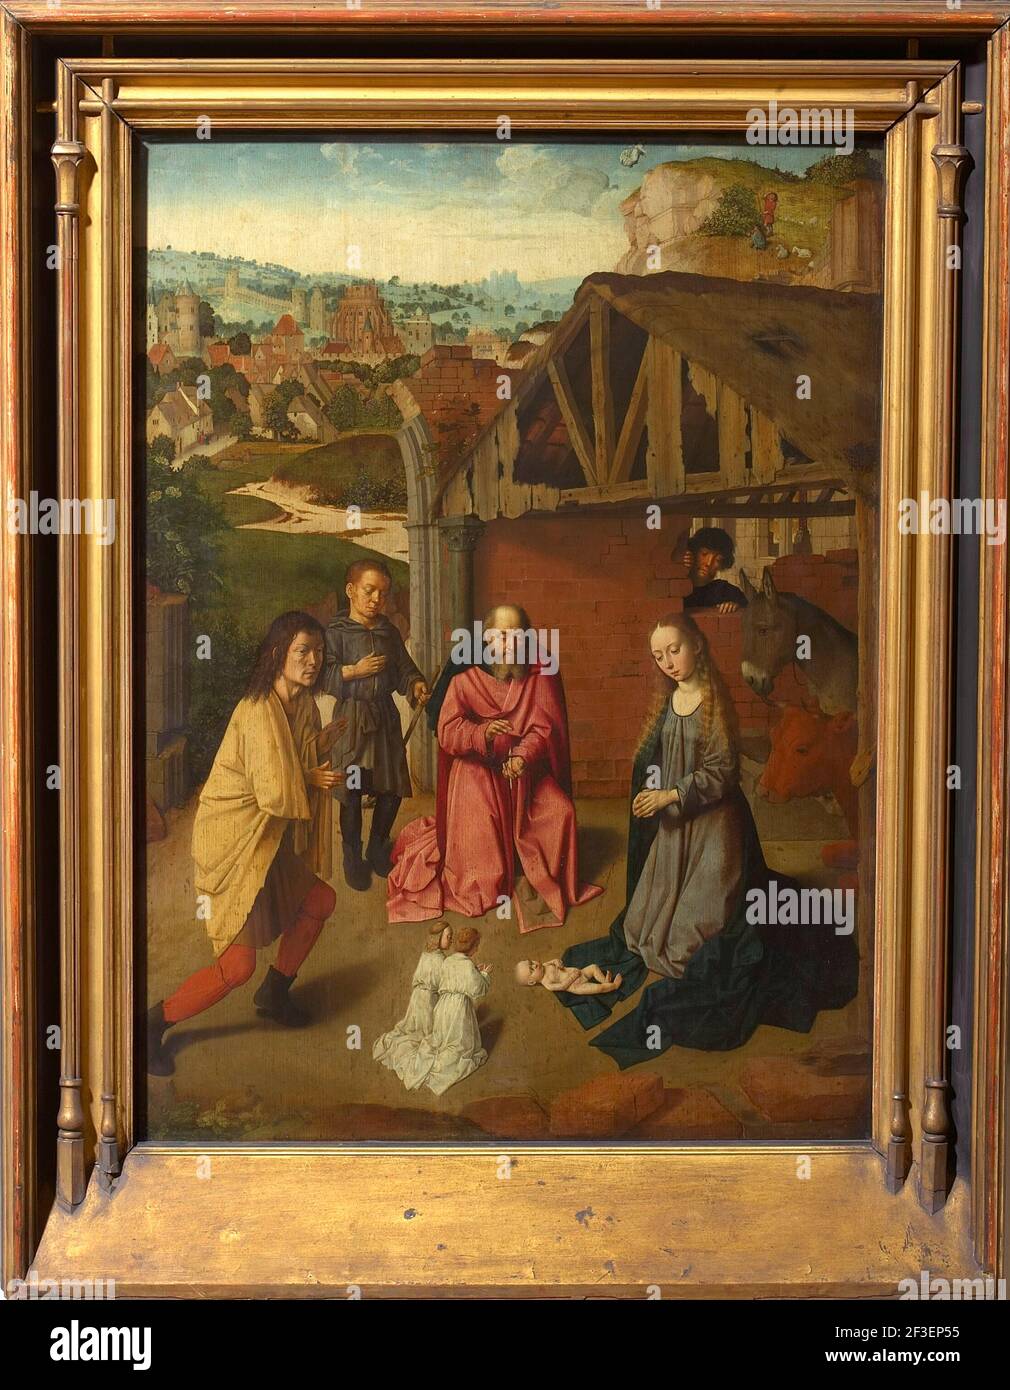 The Adoration of the Shepherds , ca 1485. Found in the collection of Szepmuveszeti Muzeum, Budapest. Stock Photo